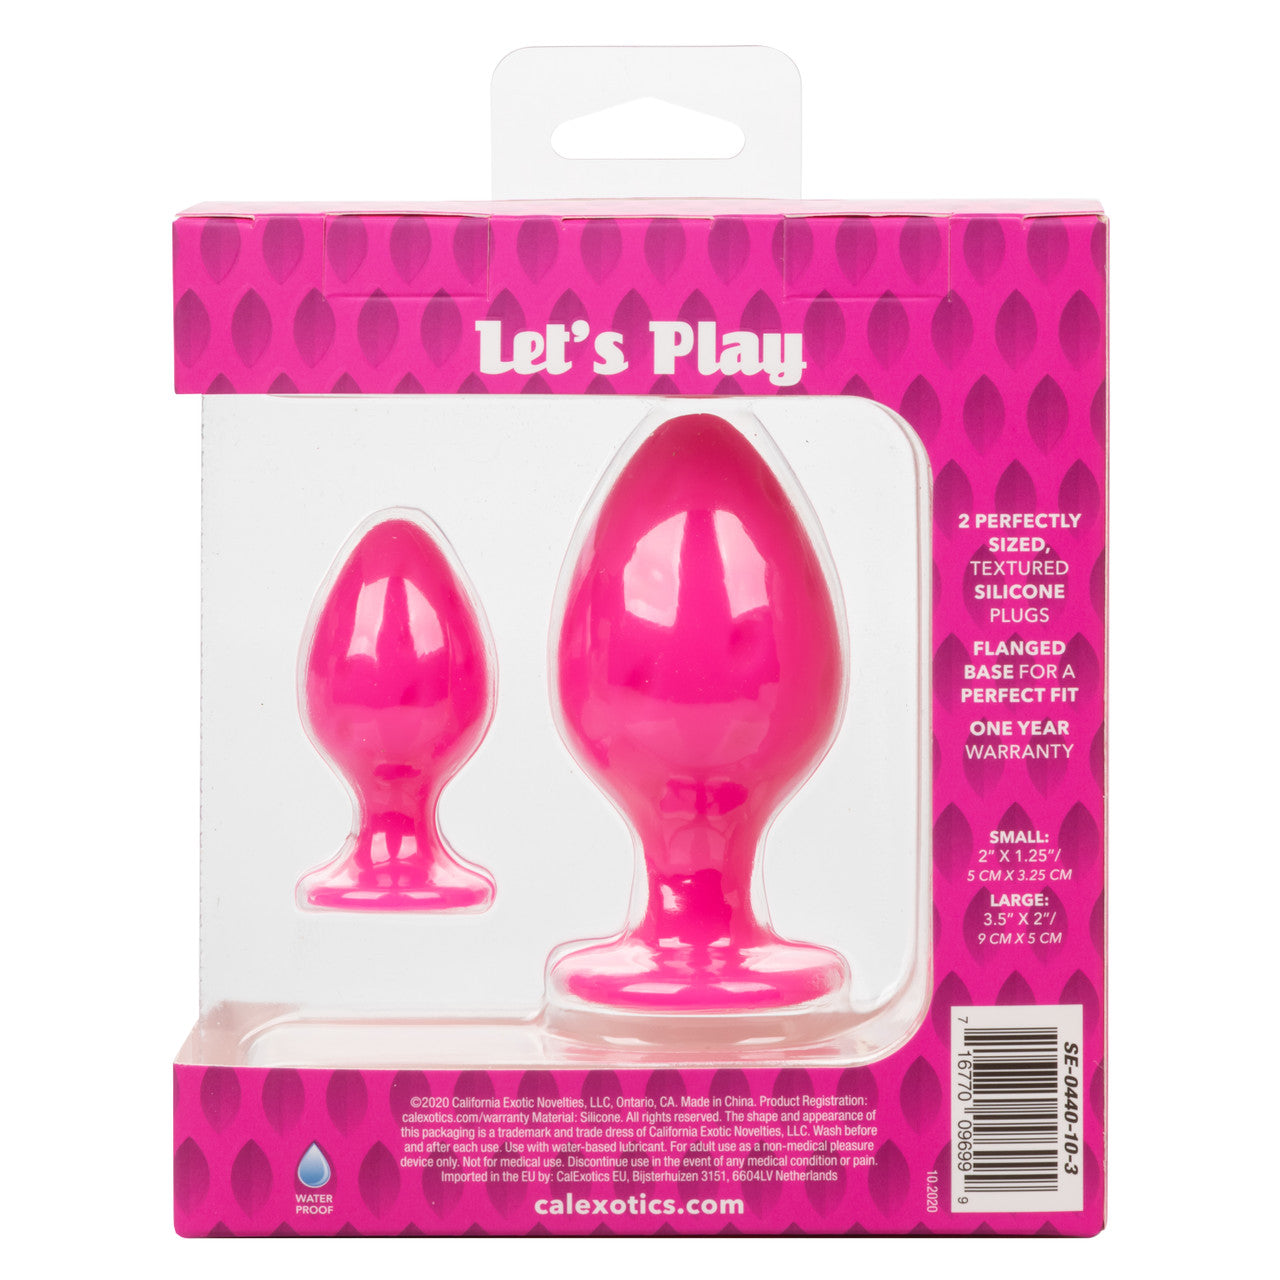 Cheeky Butt Plugs – Pink - Thorn & Feather Sex Toy Canada